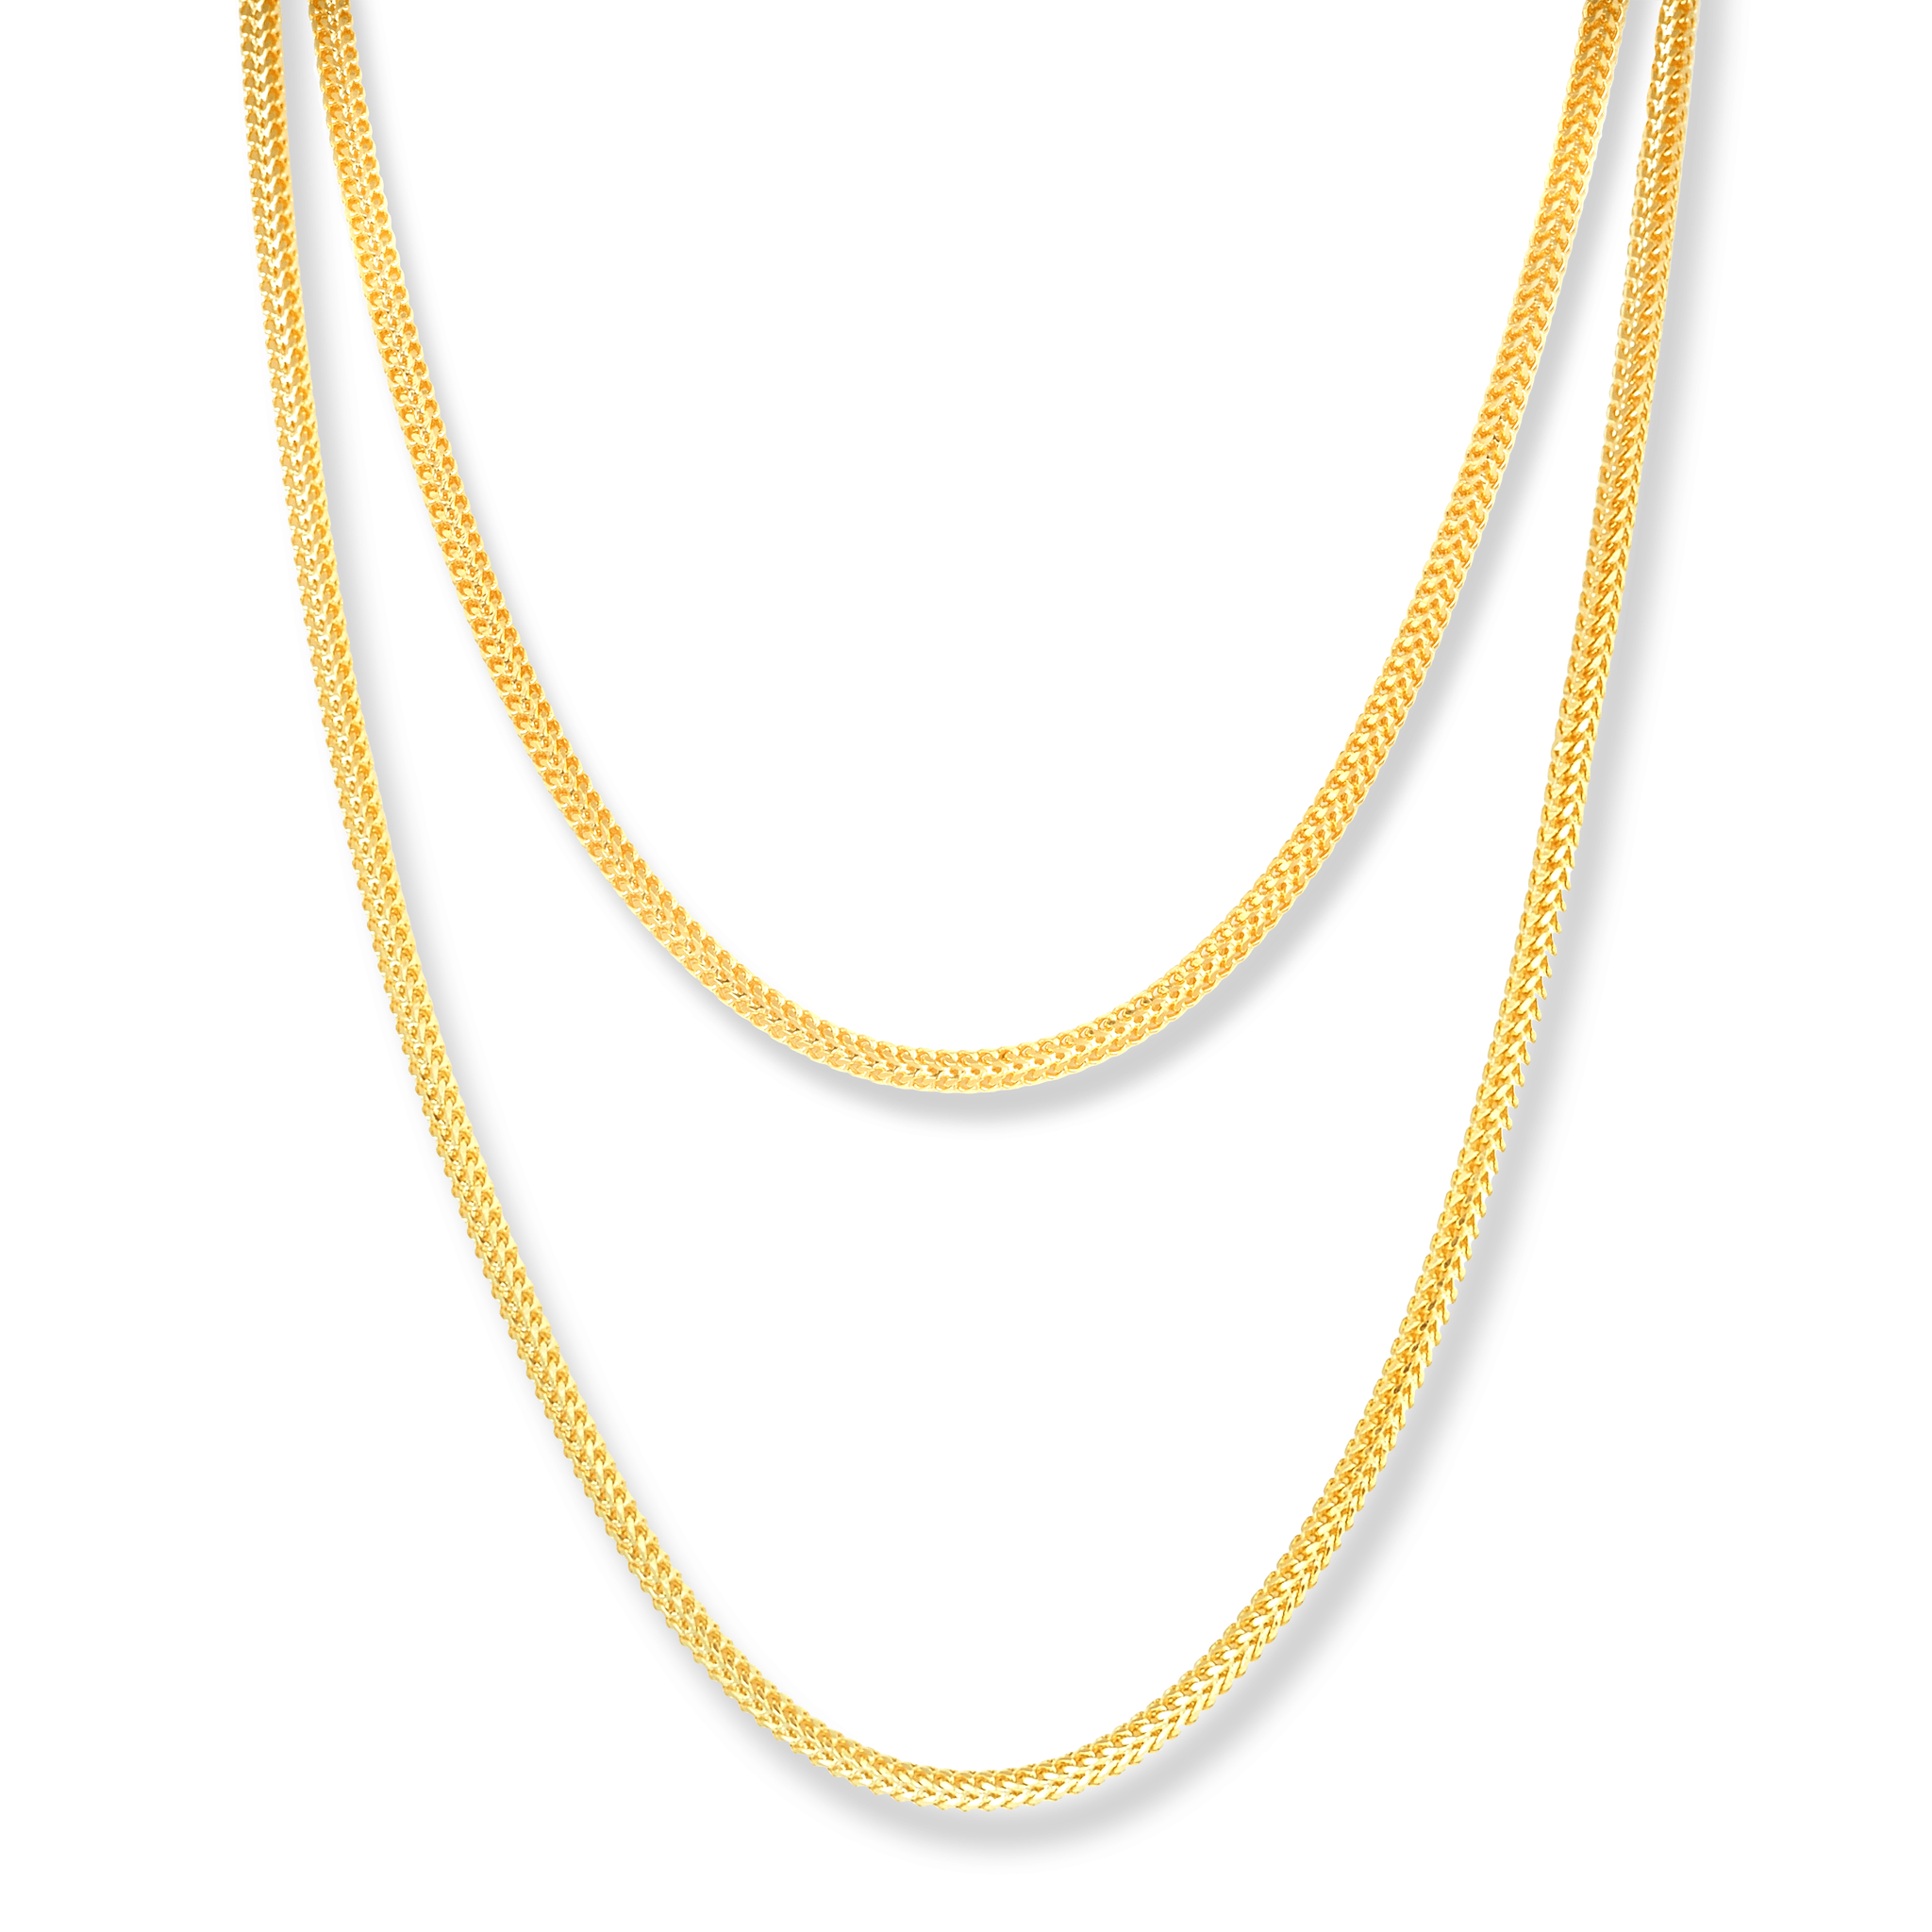 22ct Gold Round Foxtail Chain with Lobster Clasp C-7138